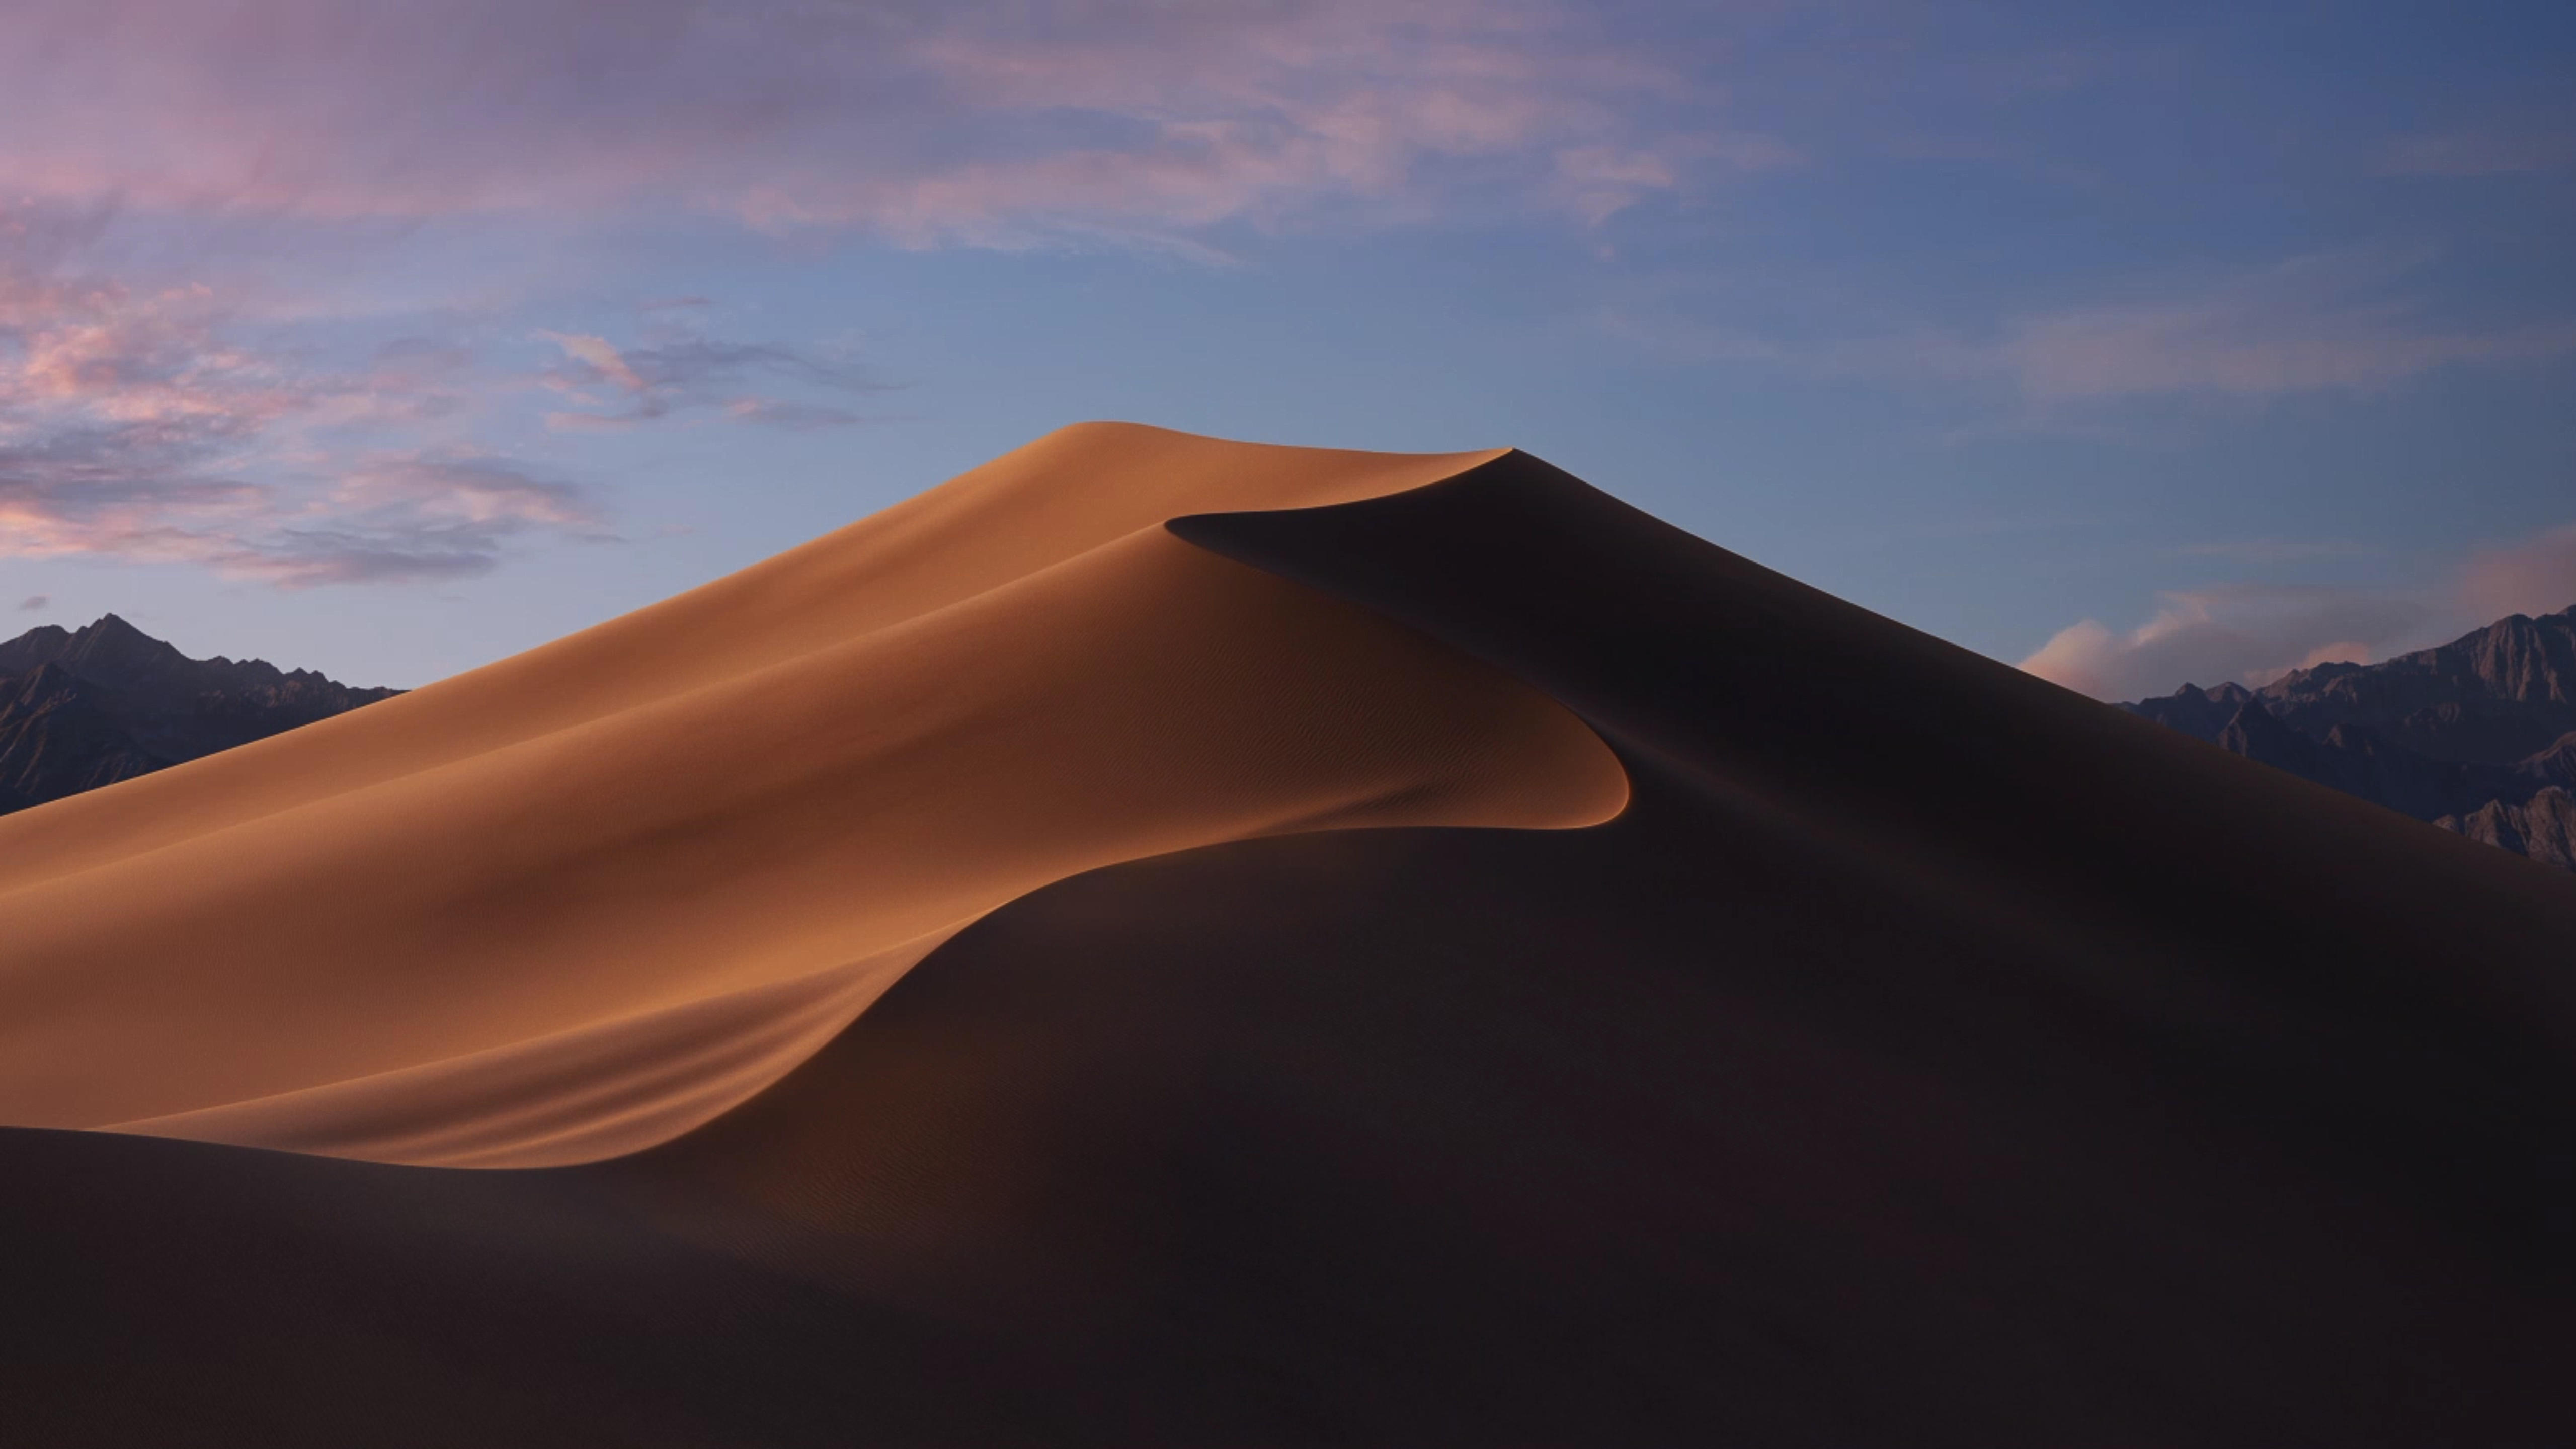 Mac Os Mojave Wallpaper For Windows 10 bossbe